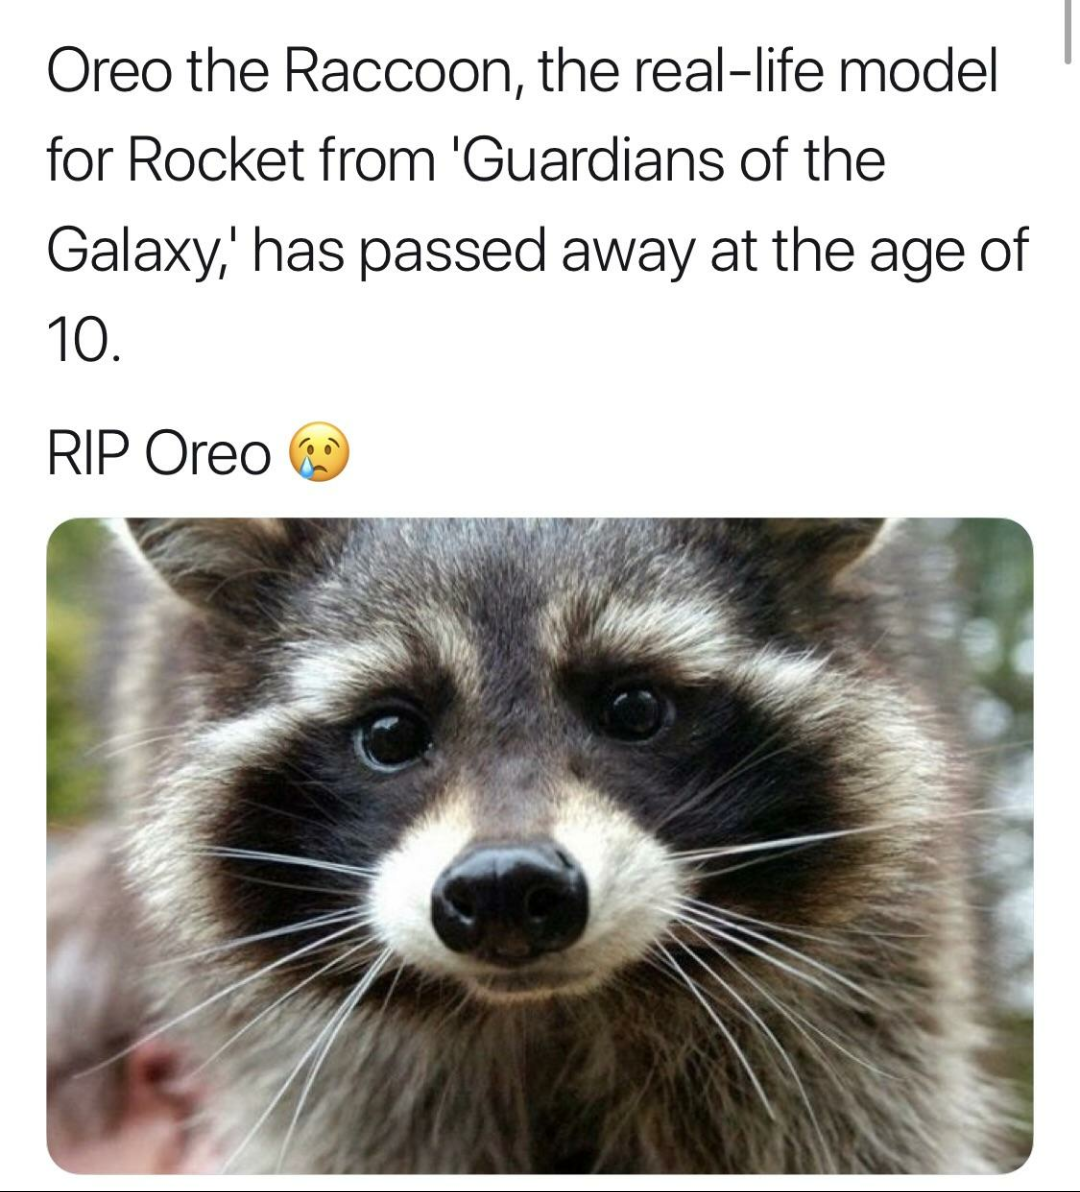 rip oreo - Oreo the Raccoon, the reallife model for Rocket from 'Guardians of the Galaxy,' has passed away at the age of 10. Rip Oreo